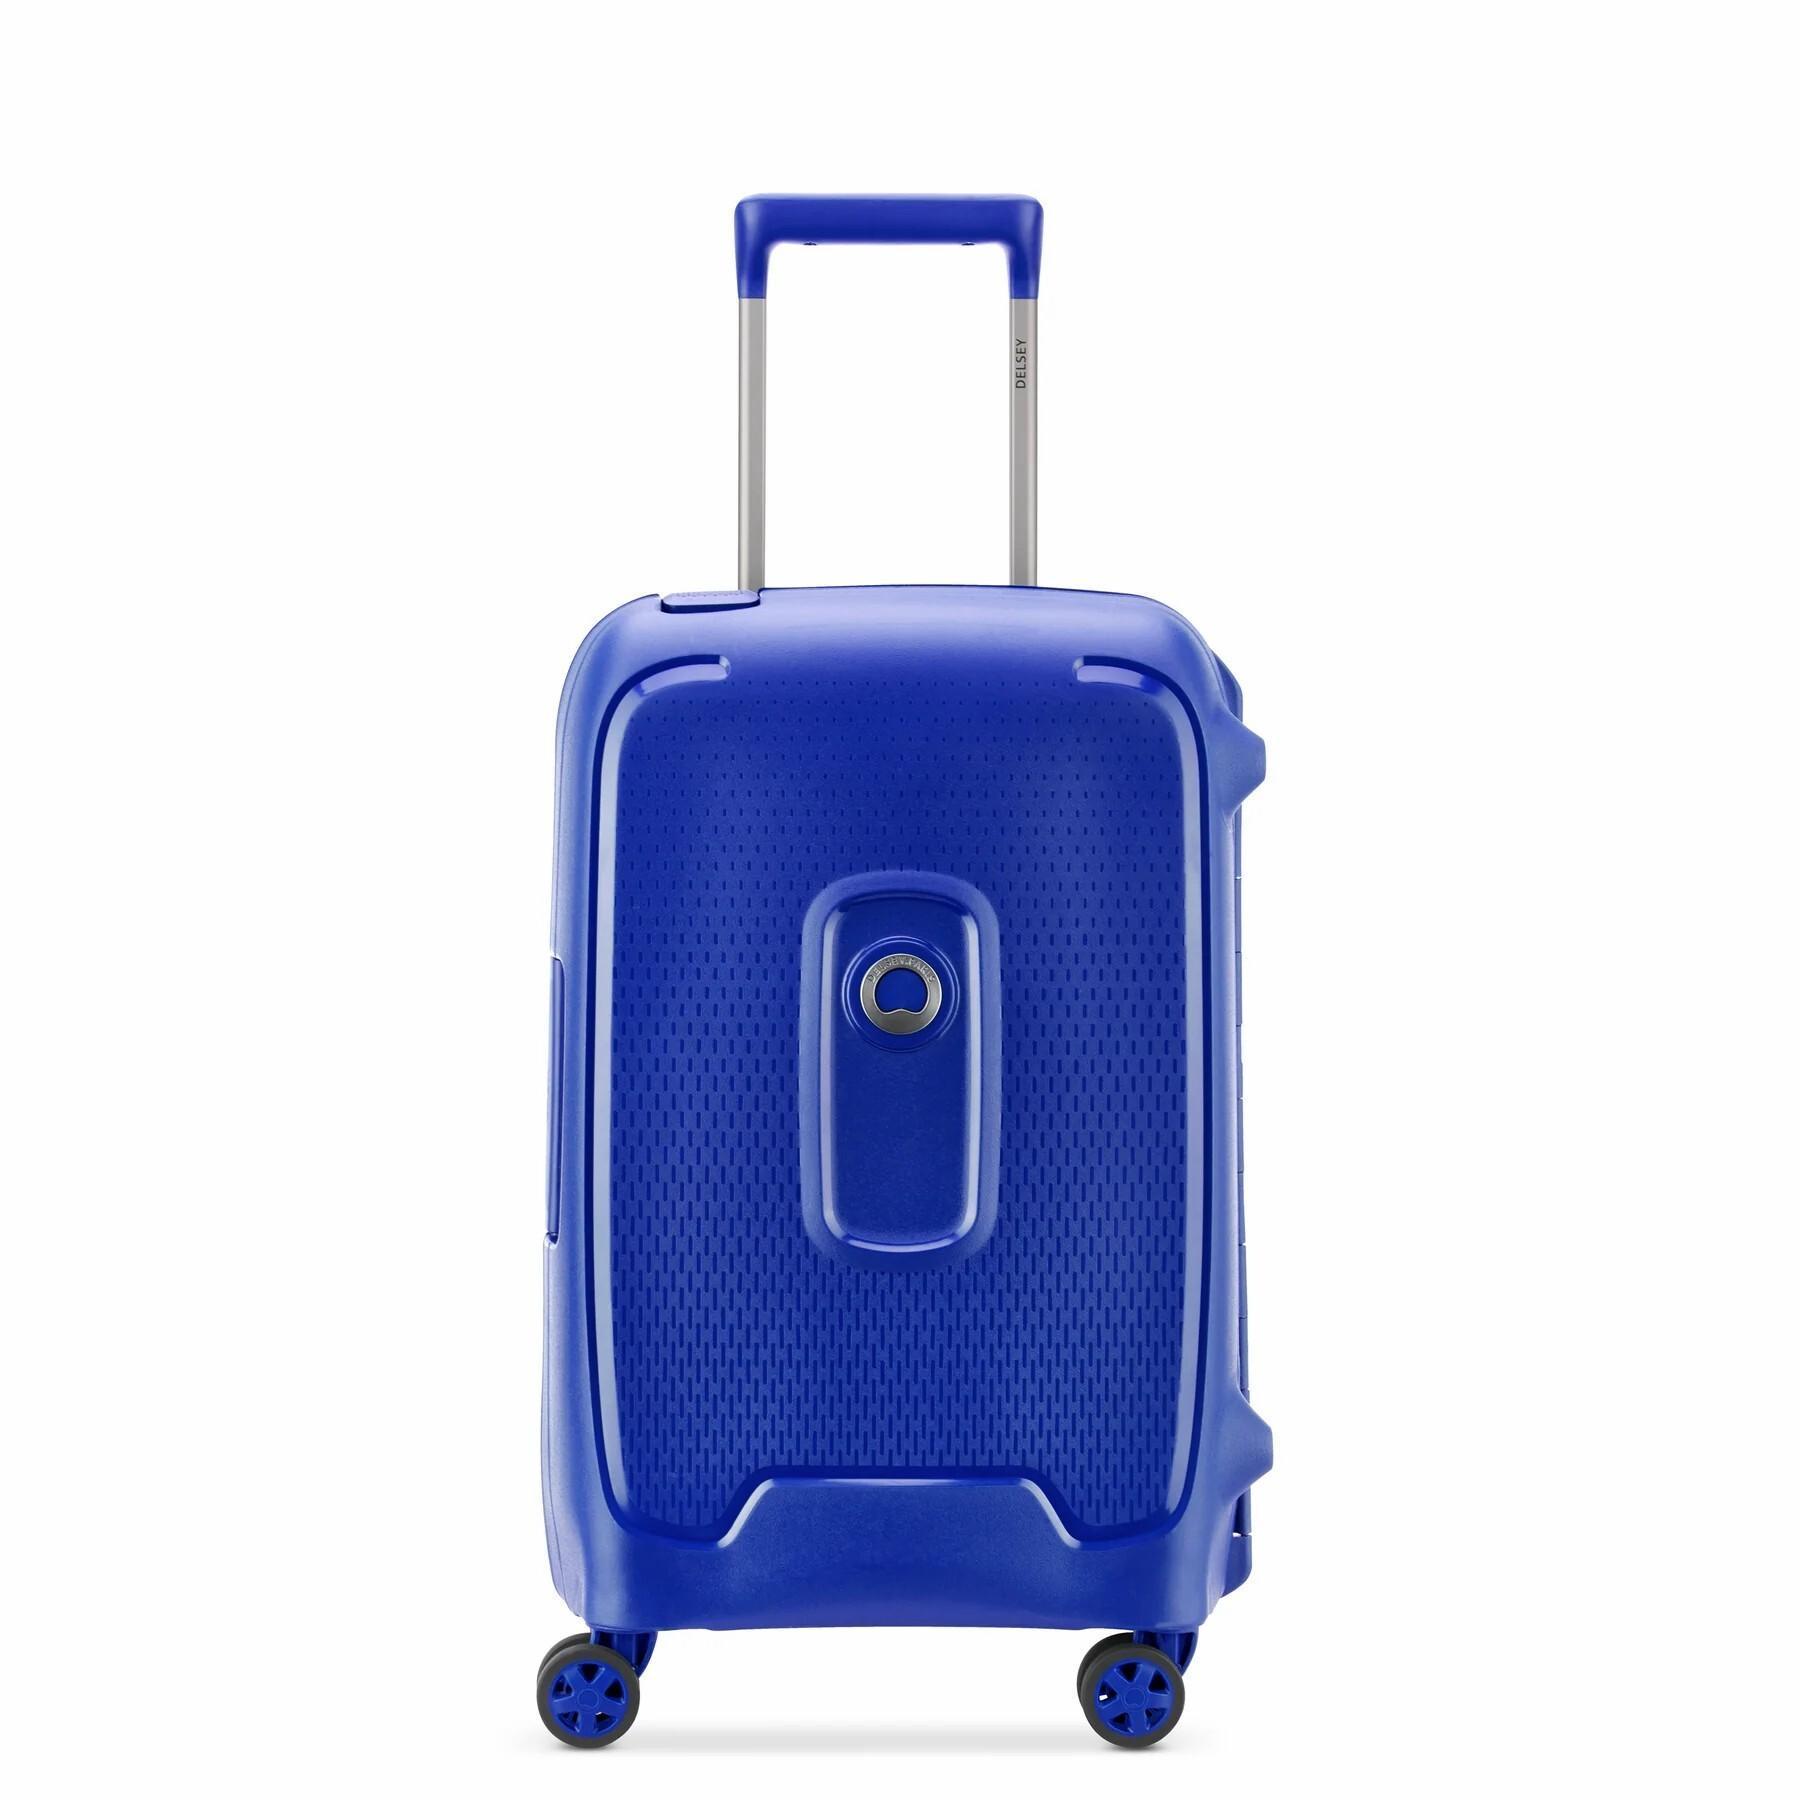 Valise trolley cabine 4 doubles roues Delsey Moncey 55 cm